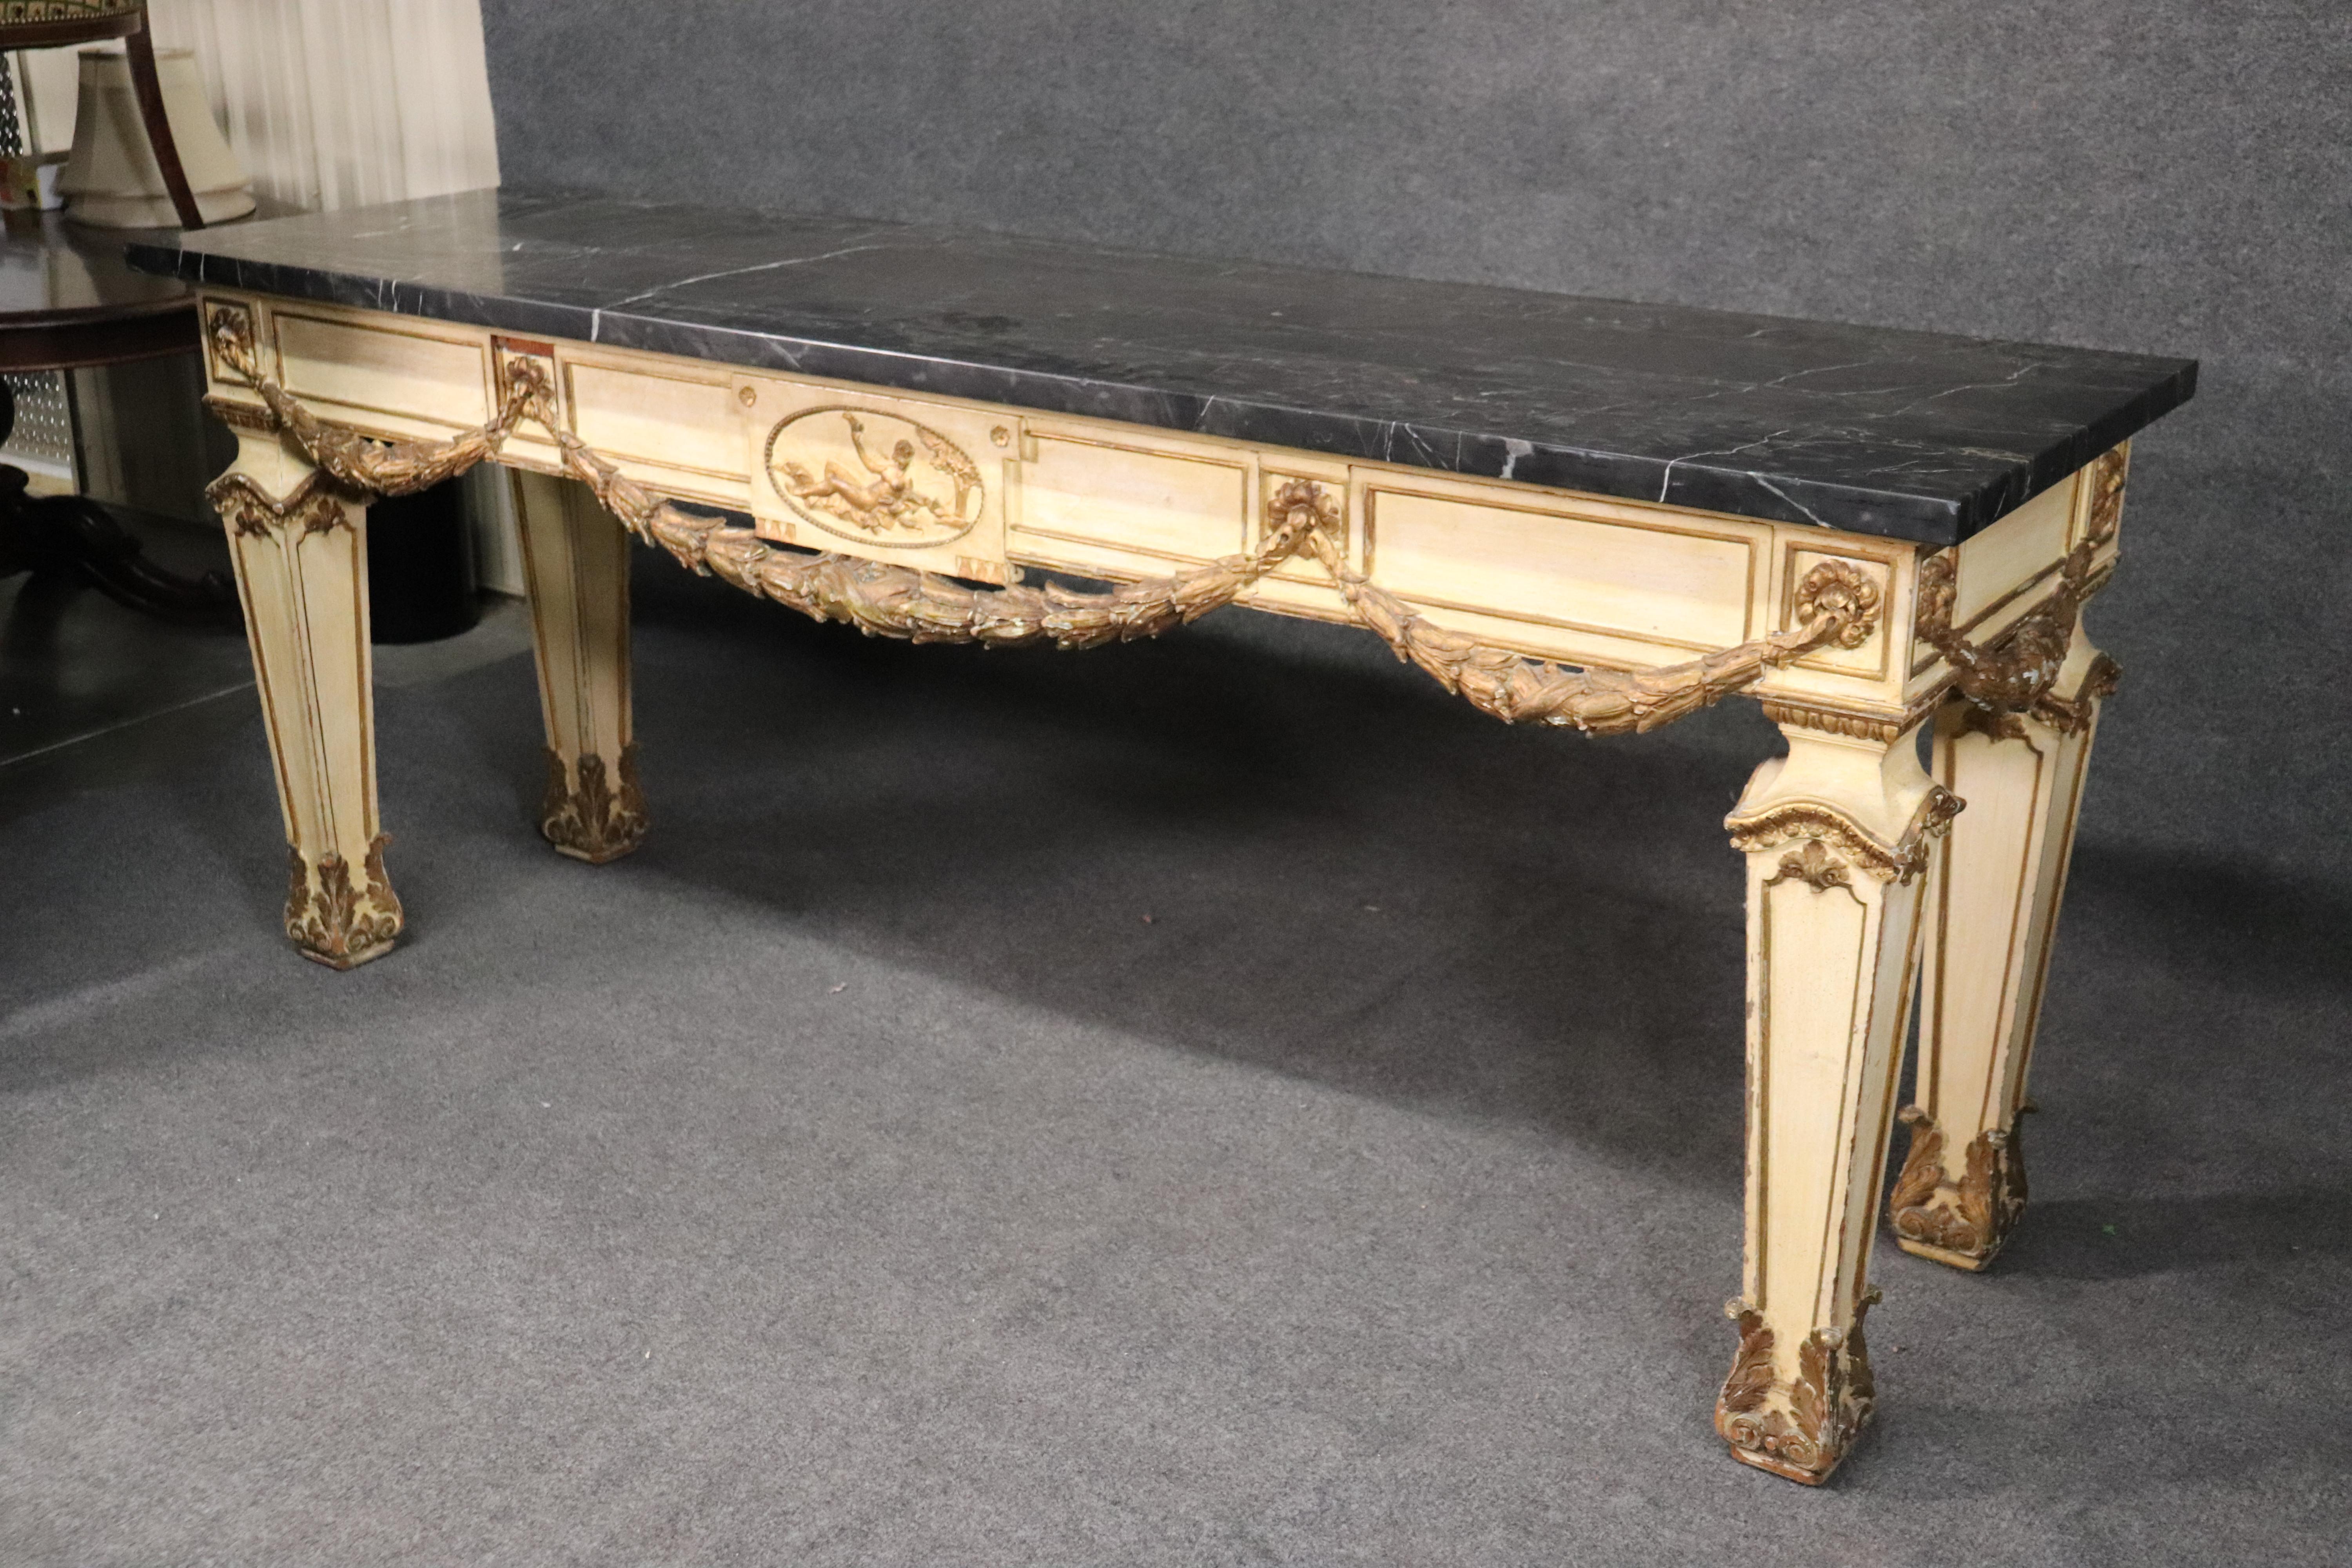 This is a grand buffet that can also be used as a console table because of its design. It was outfitted with gorgeous purple velvet lined drawers for silverware, but can easily be a console. The table measures 85 wide x 25 deep x 36 tall. The table